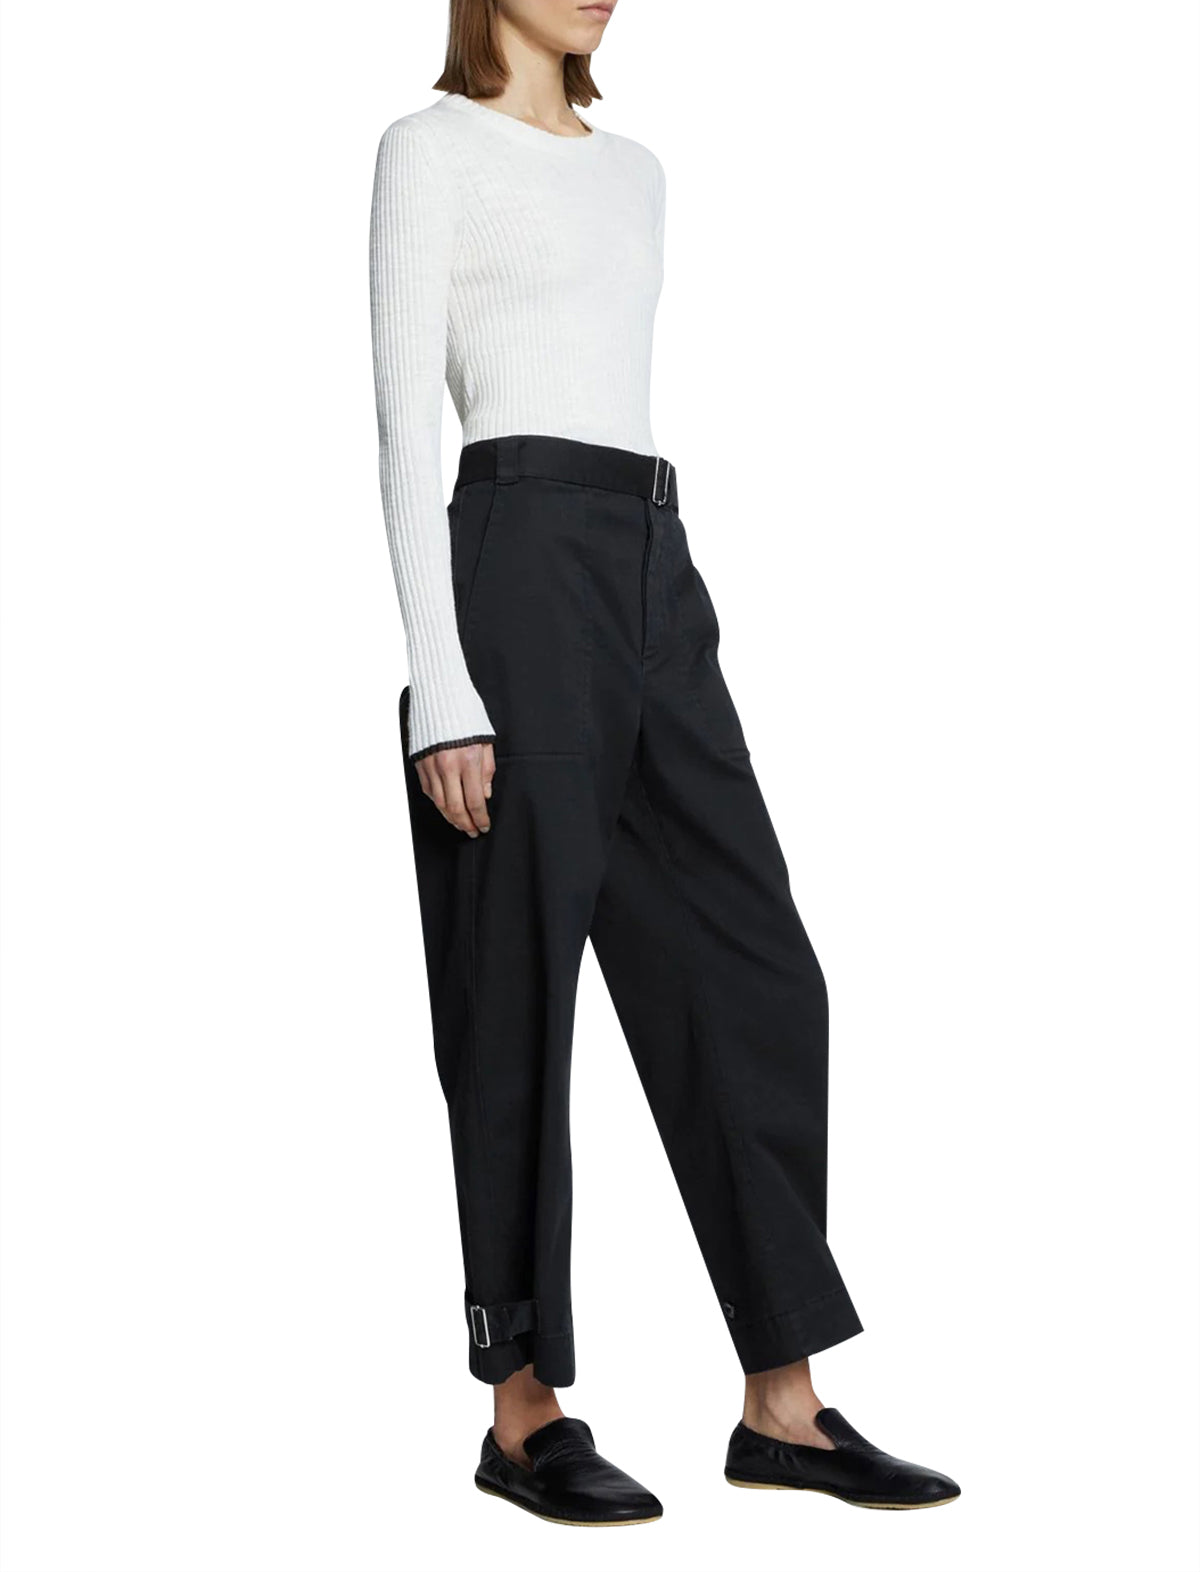 PROENZA SCHOULER WHITE LABEL Cotton Twill Tapered Pants in Black